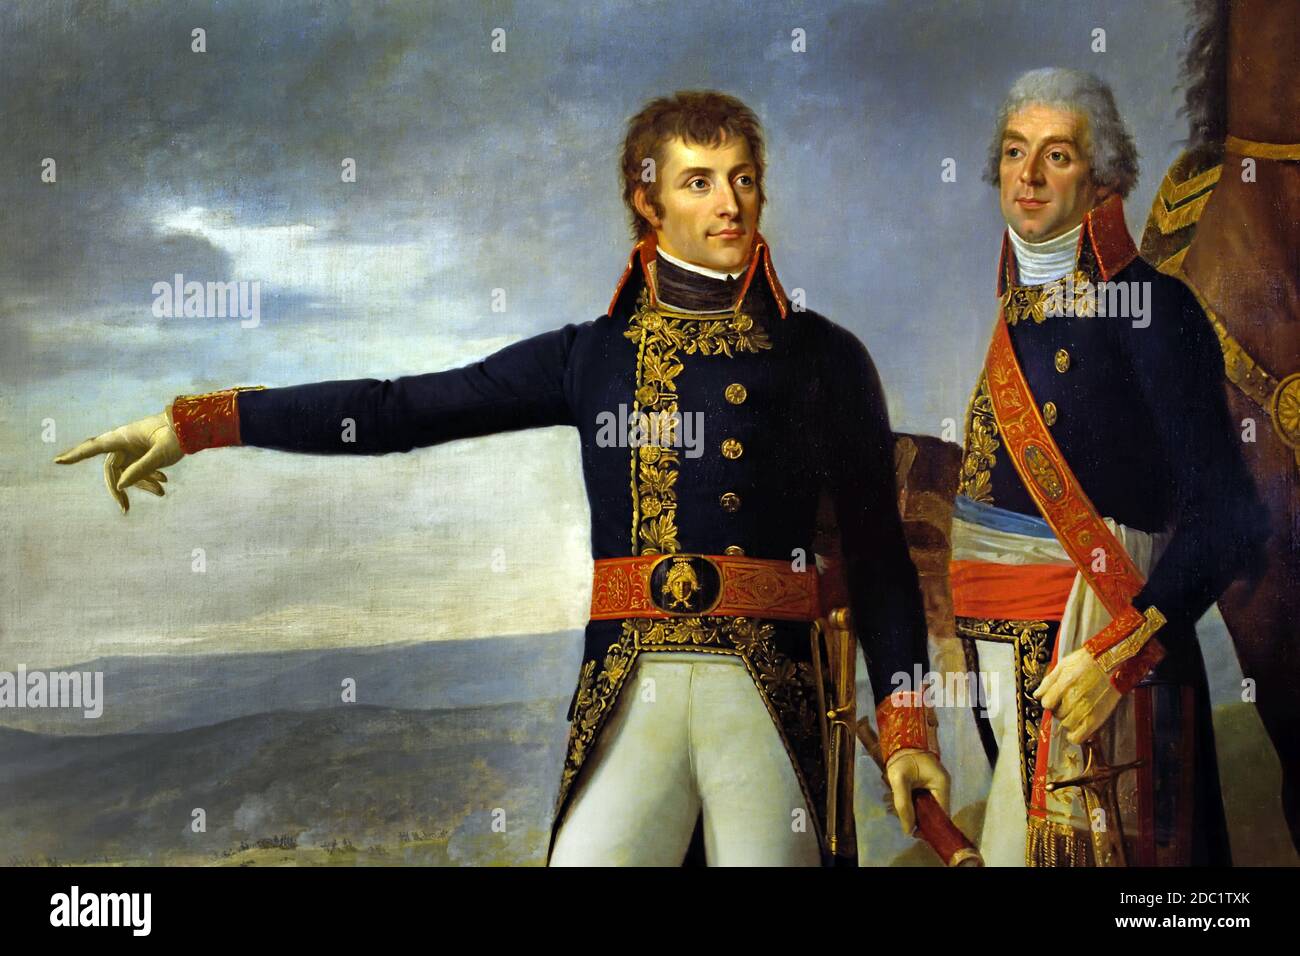 Emperor Napoleon Bonaparte - General Bonaparte and his chief of staff general Berthier at the Battle of Marengo 14 June 1800    France, French. Stock Photo